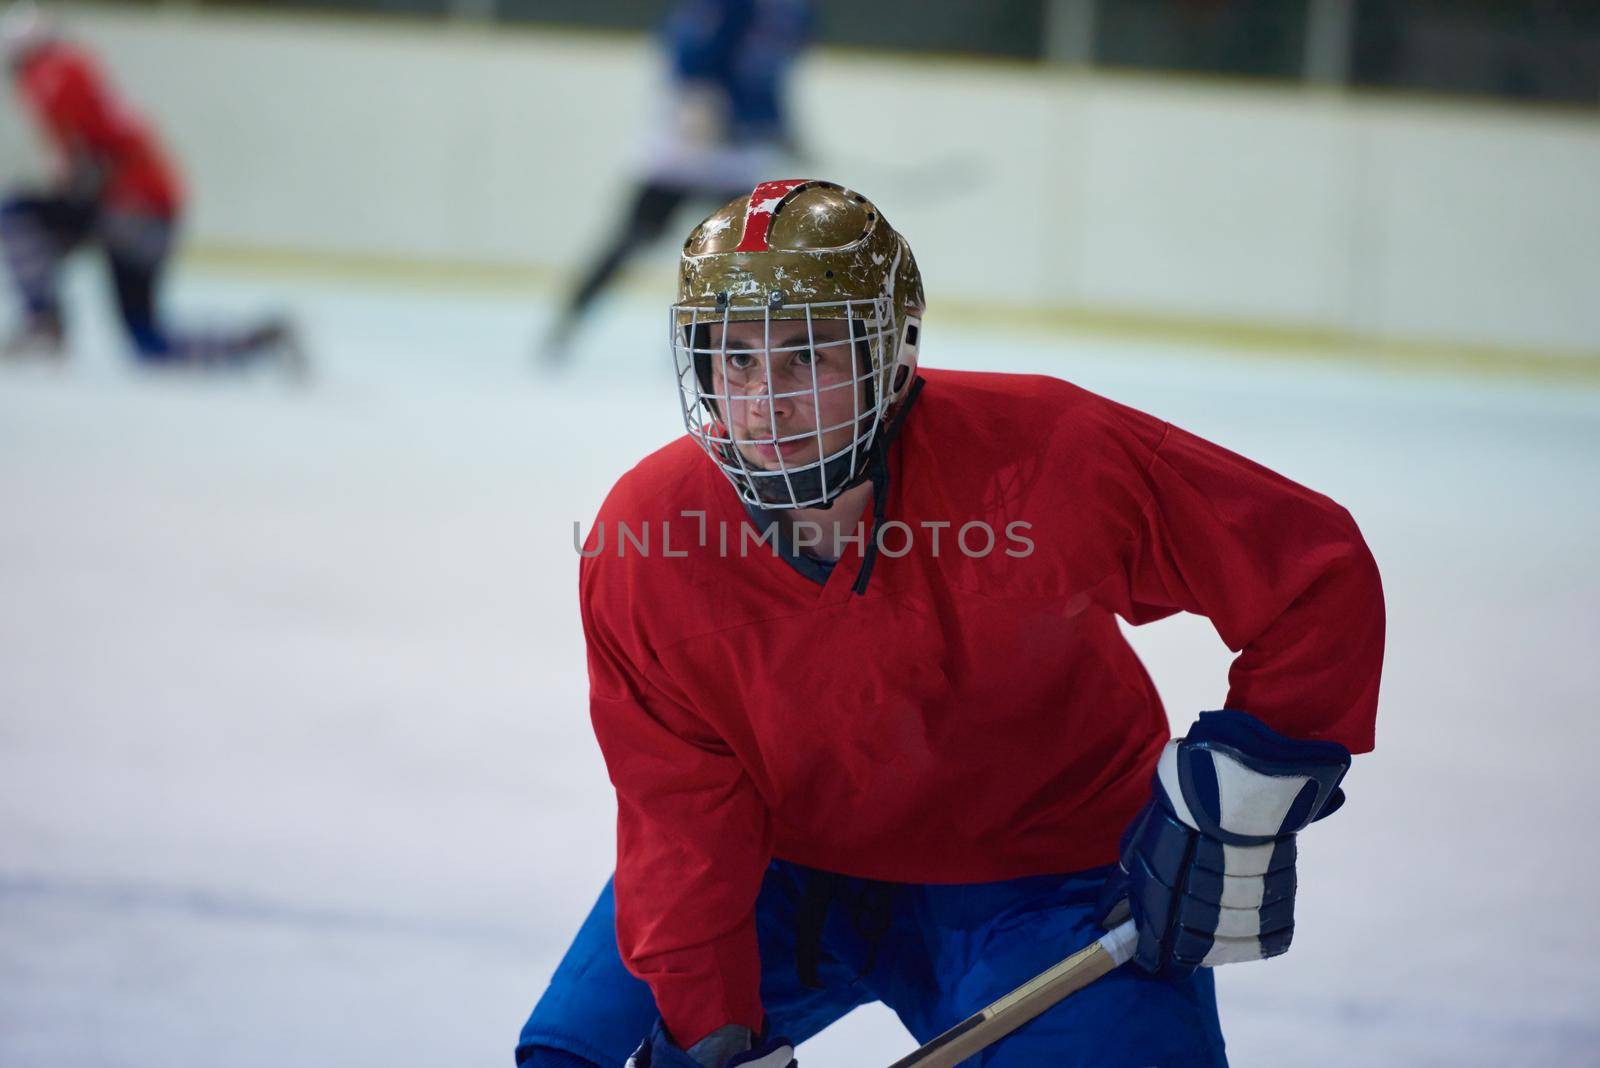 ice hockey player in action by dotshock